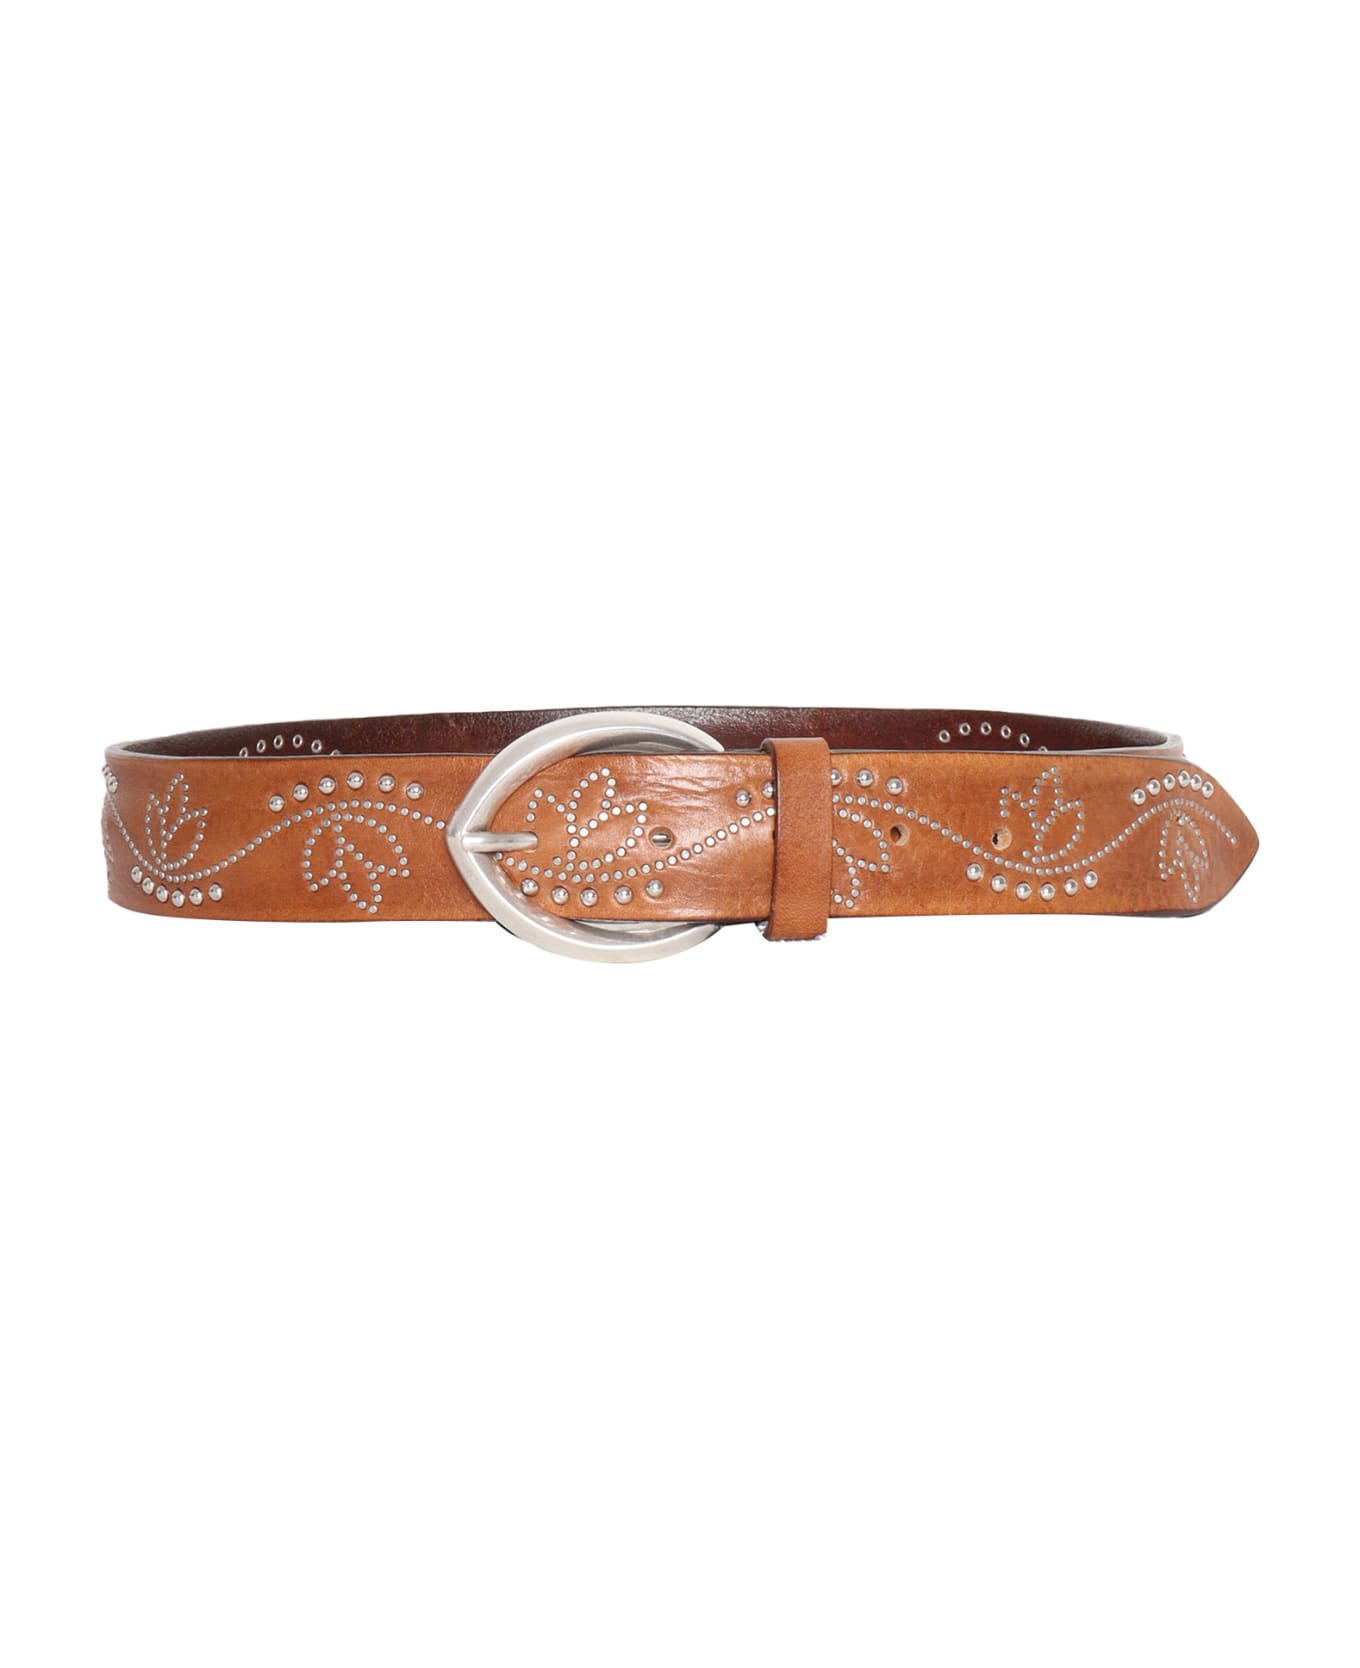 Orciani Leather Belt With Studs - BROWN